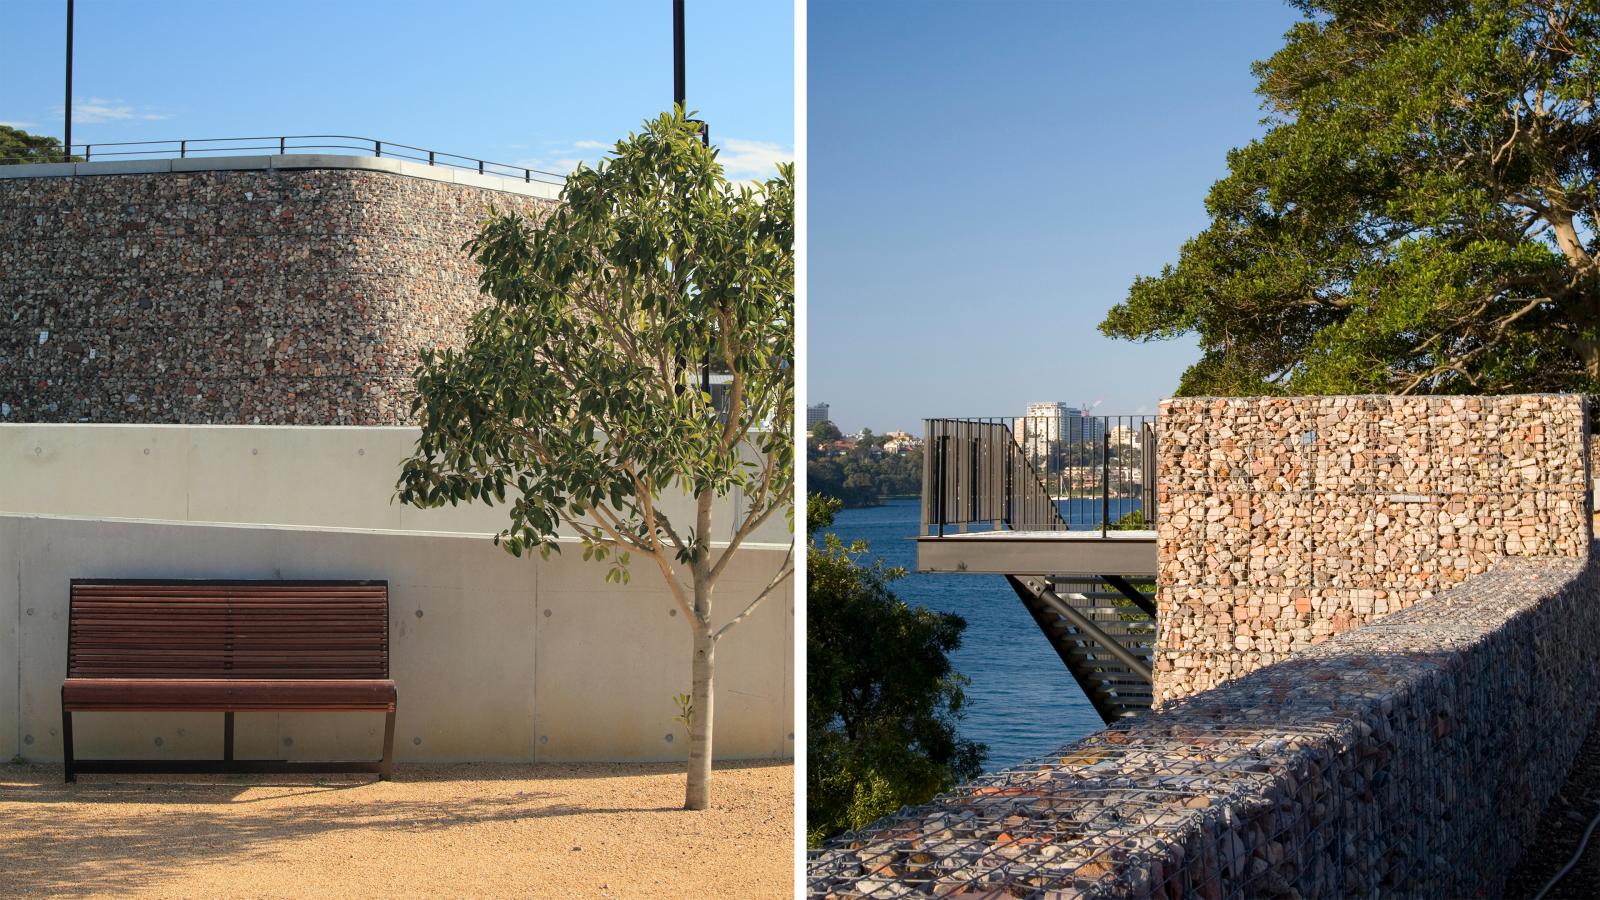 Split image: left side shows a park bench next to a tree, backed by a rock-filled wire retaining wall under a clear sky in Ballast Point Park; right side shows a different angle of the same type of wall stretching towards a body of water, with city buildings visible in the distance.